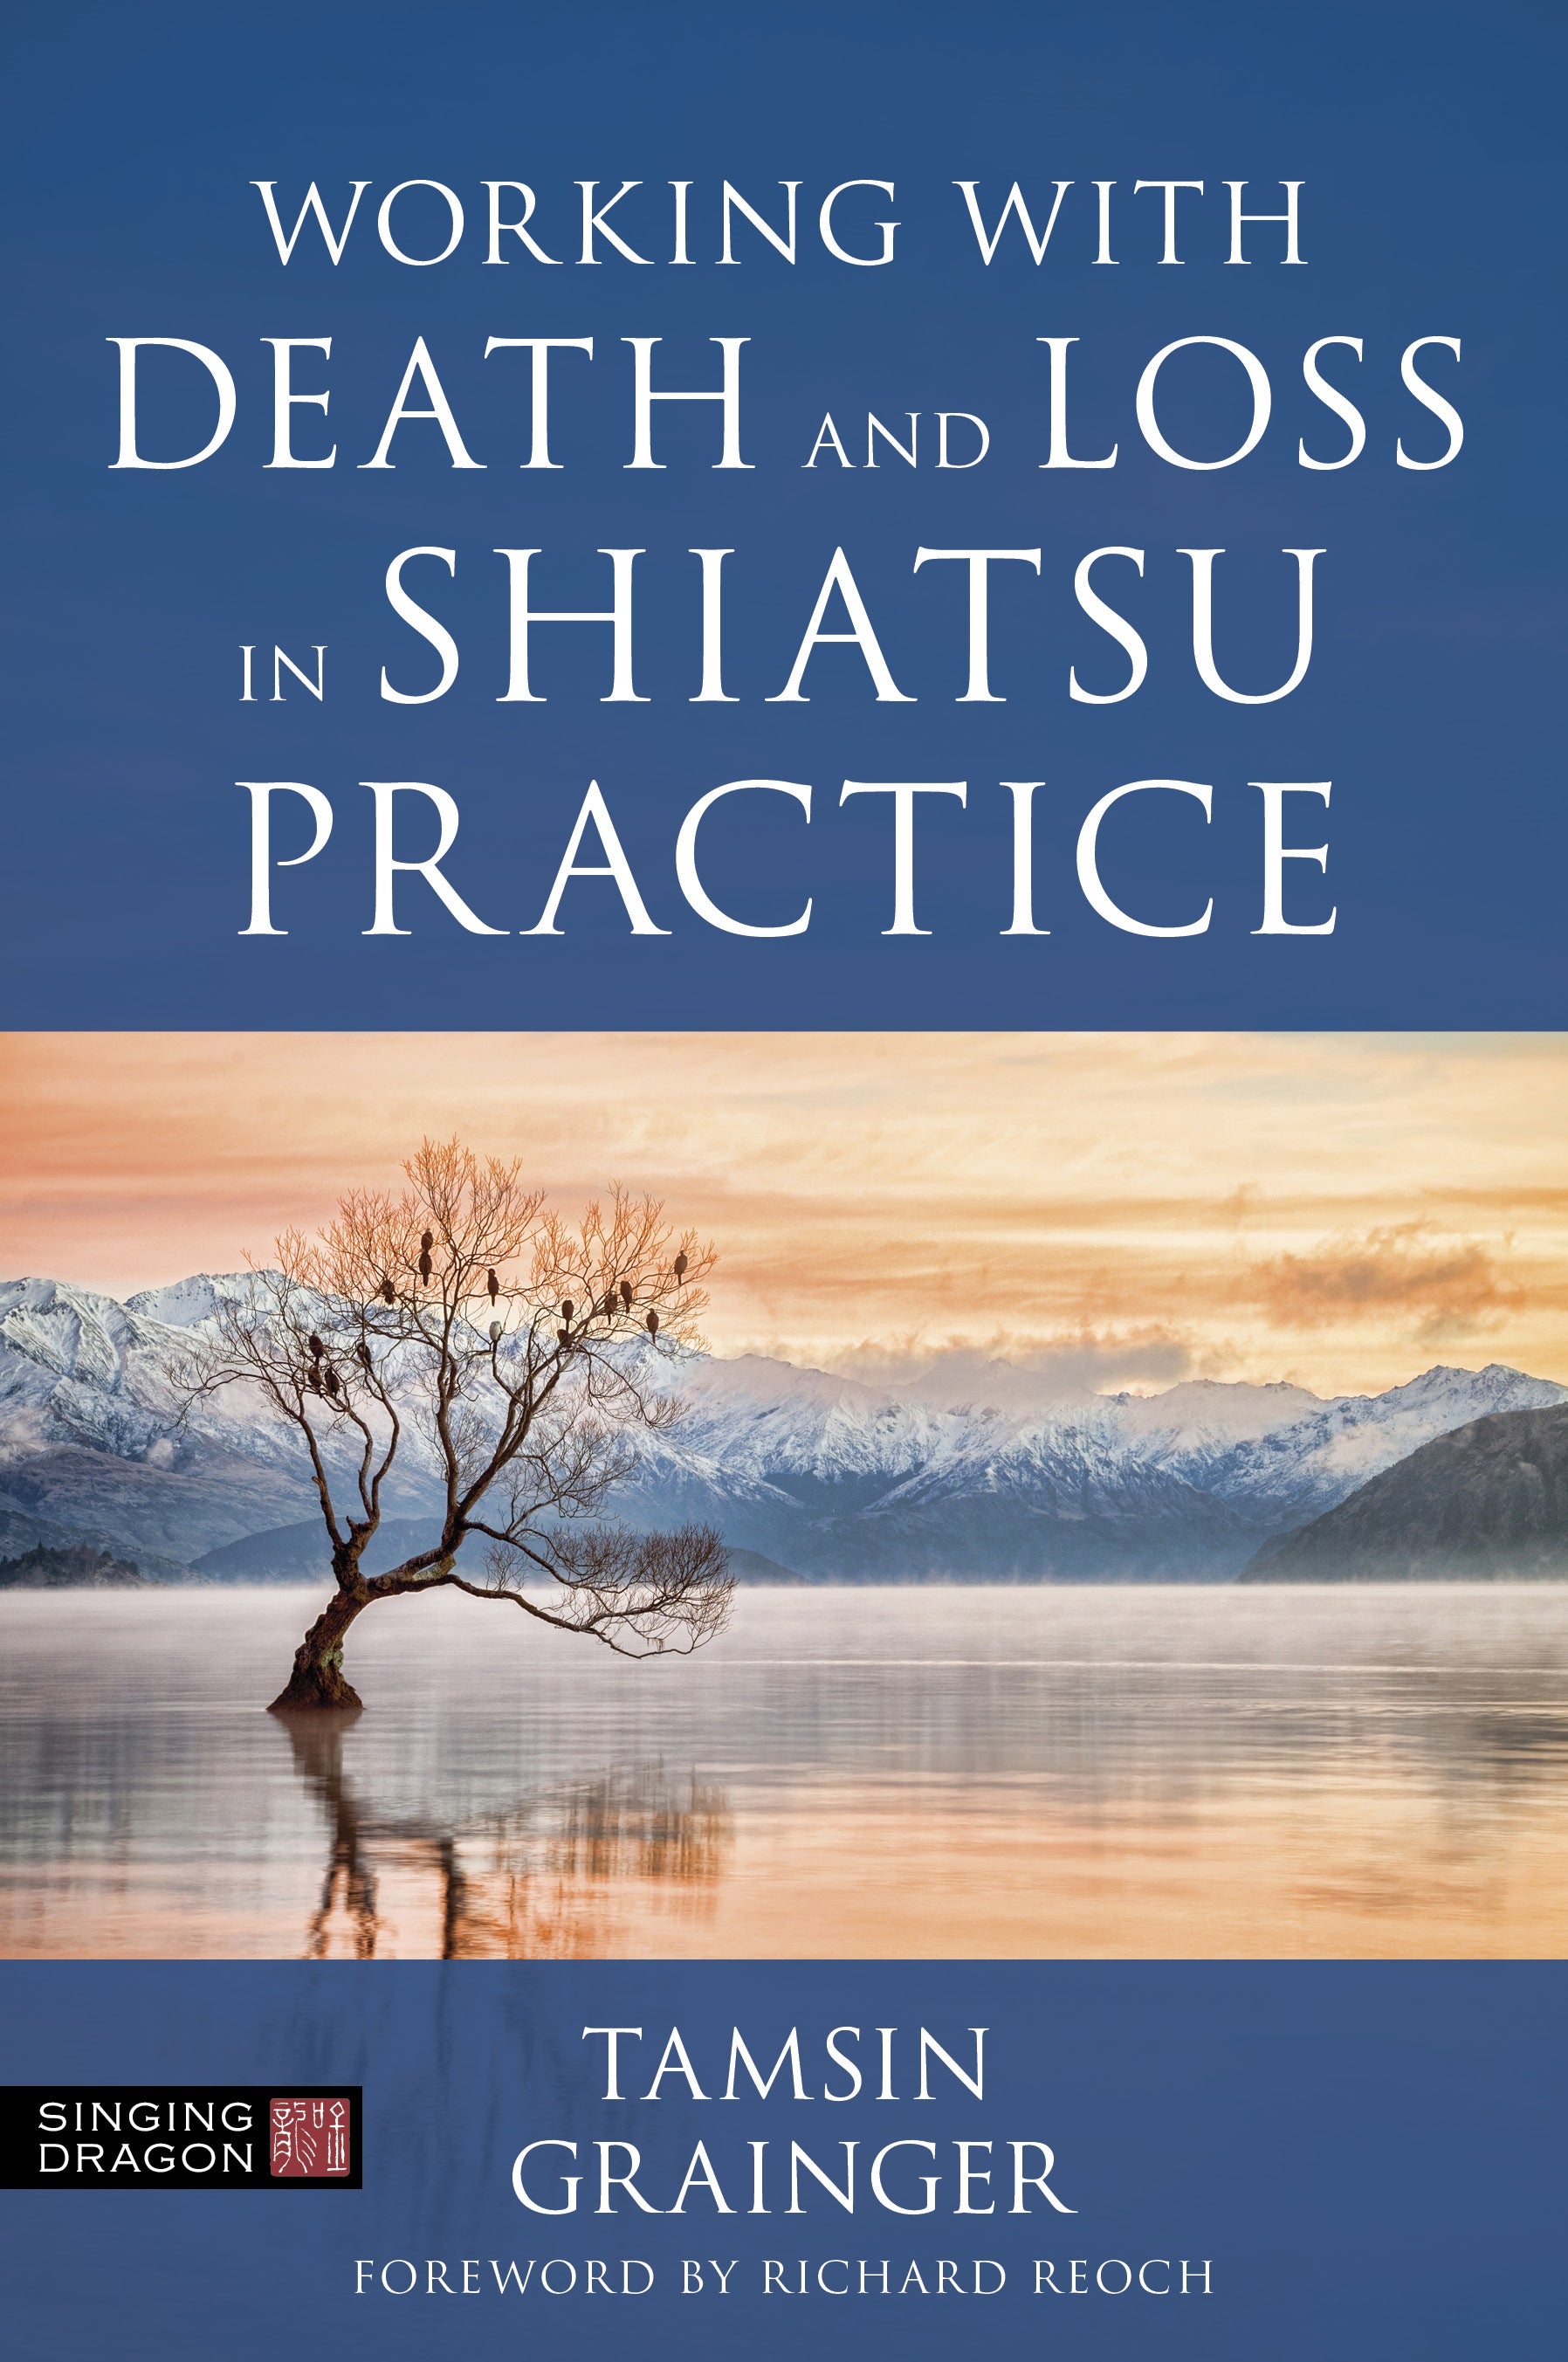 Working with Death and Loss in Shiatsu Practice by Tamsin Grainger, Richard Reoch